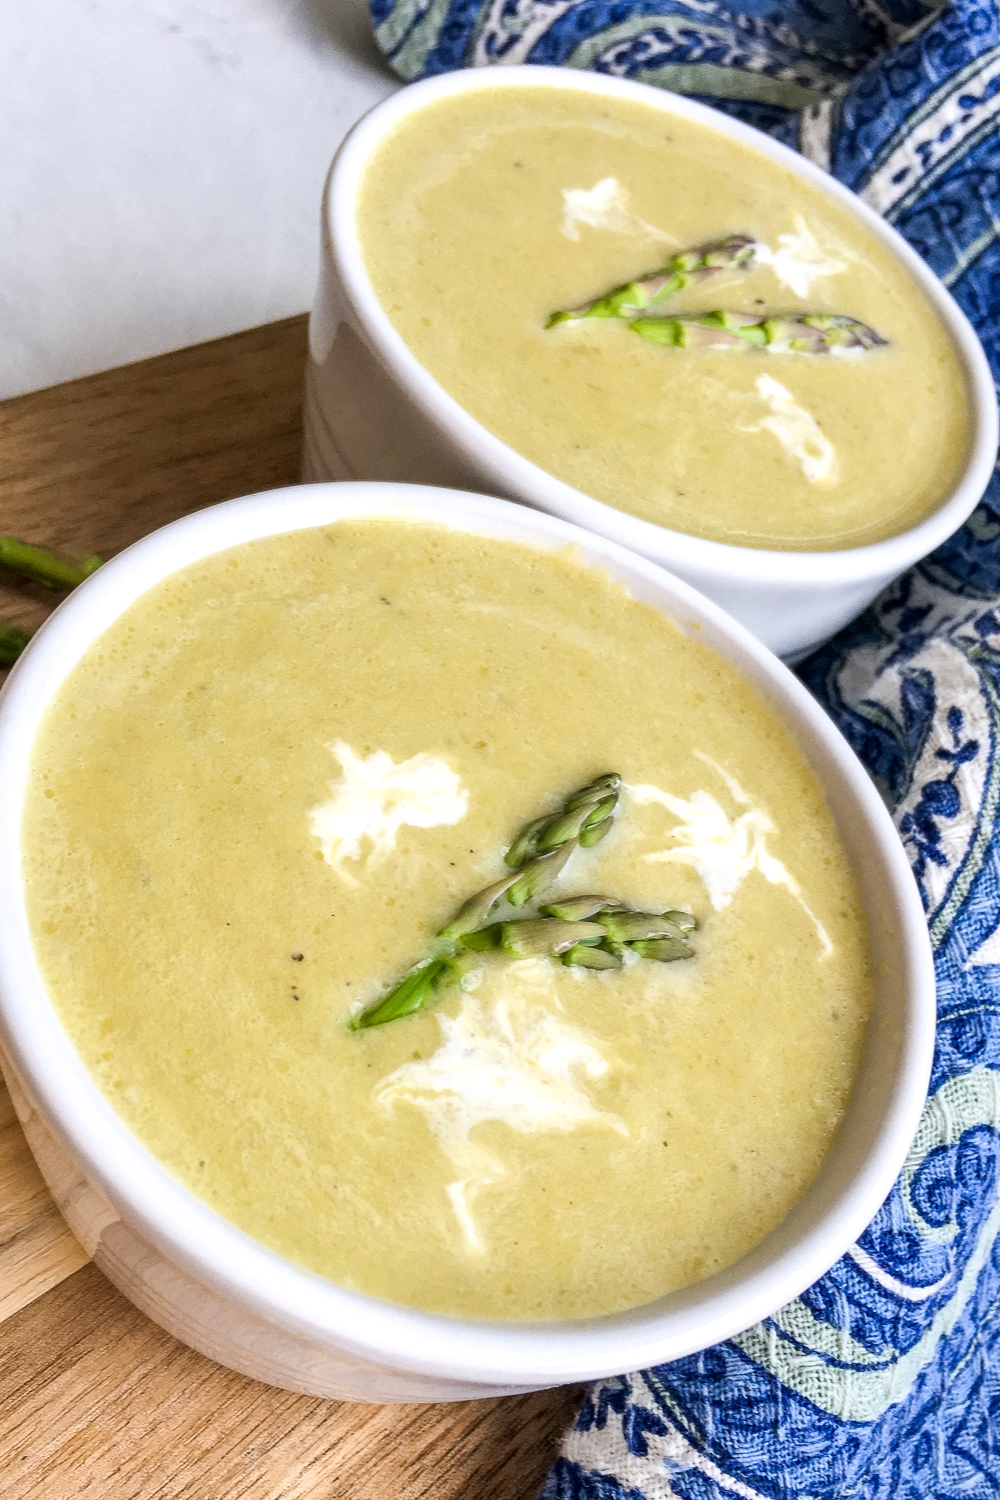 Looking for an instant pot soup recipe? The best asparagus soup you'll ever have is made in the pressure cooker! It's creamy and flavorful.